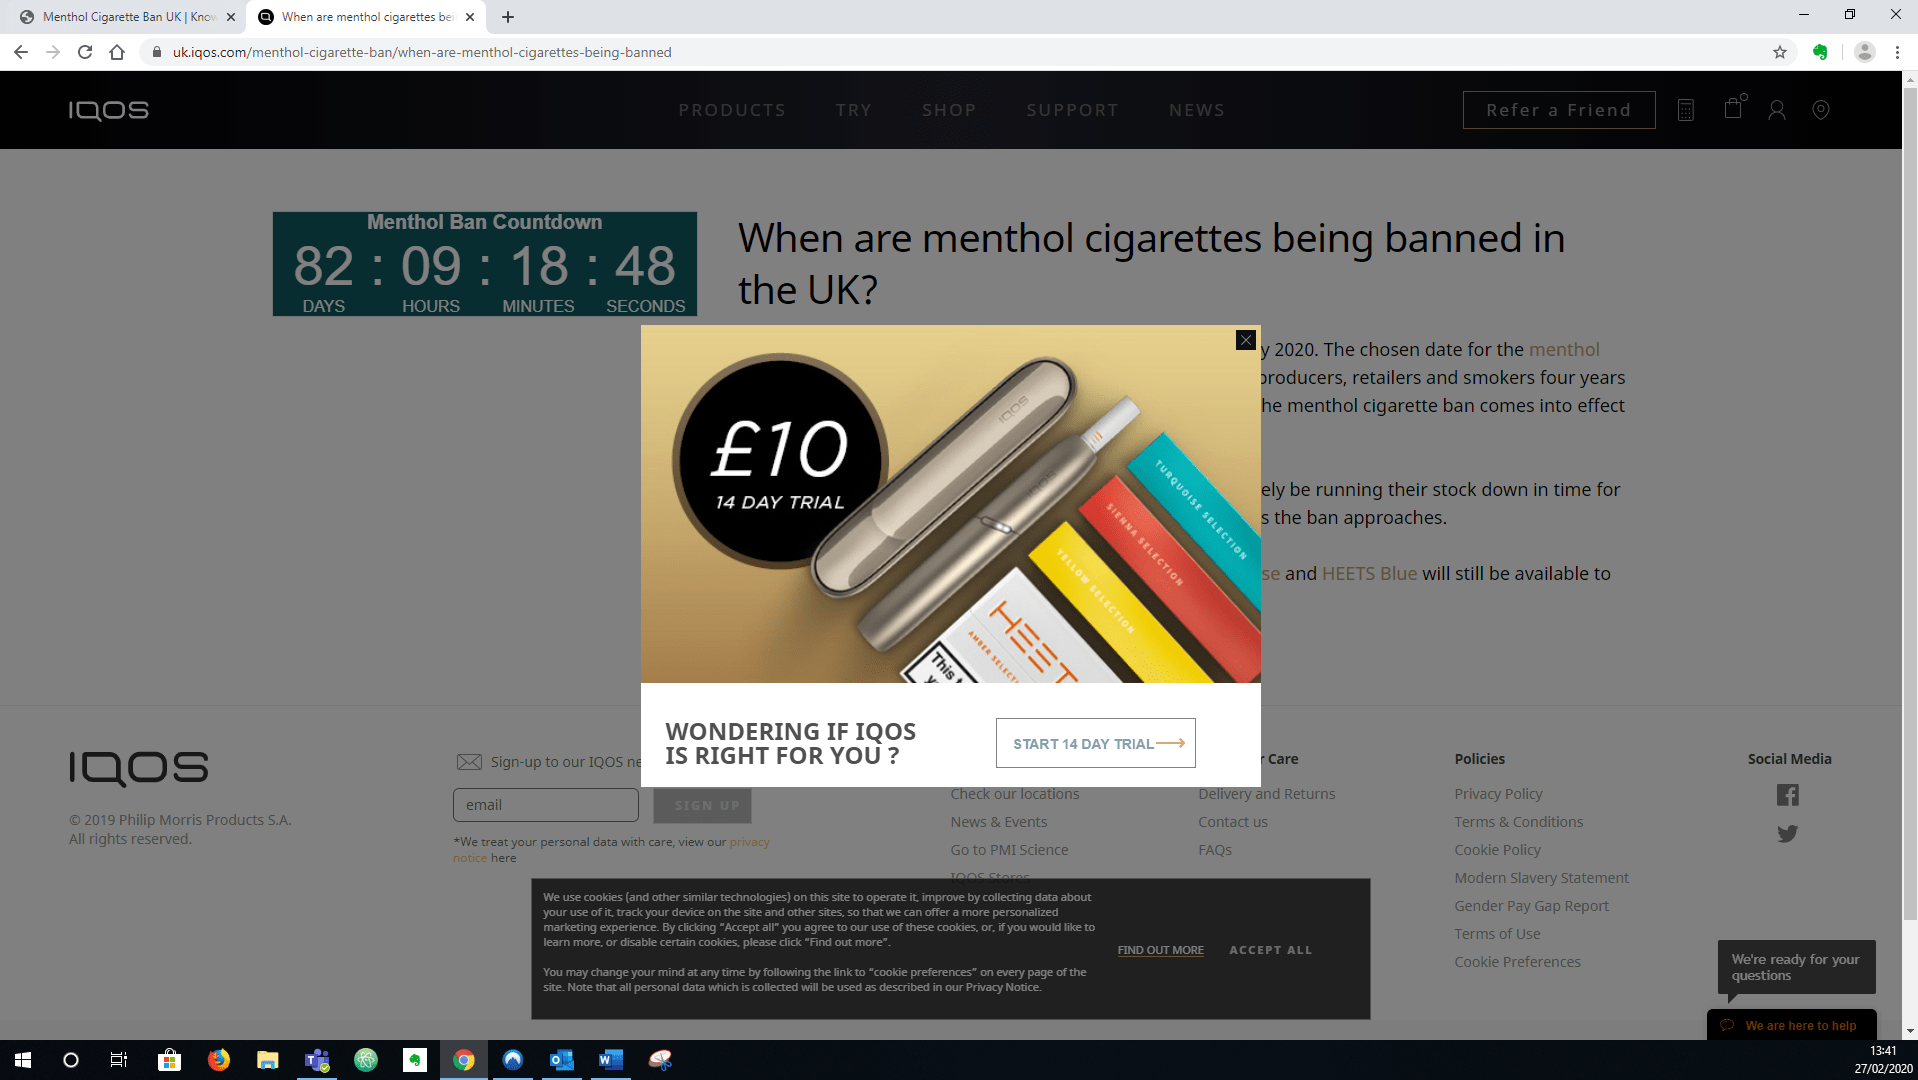 Image of screenshot with menthol ban countdown clock, and IQOS pop-up and £10 trial